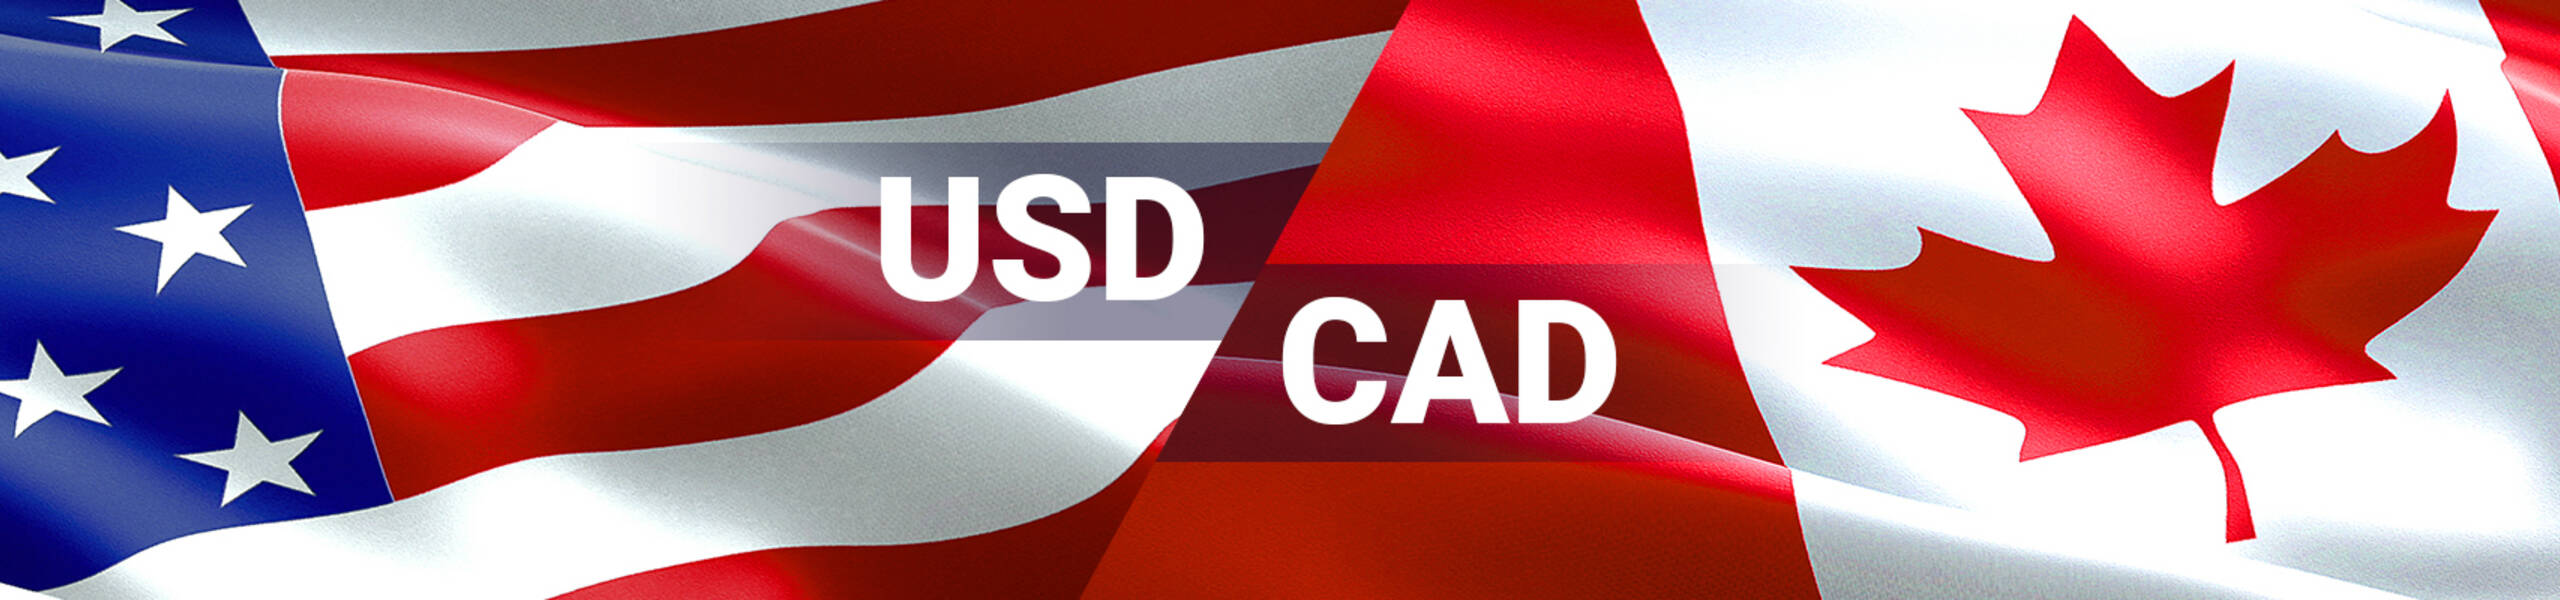 USD/CAD: will 5-0 be realized?